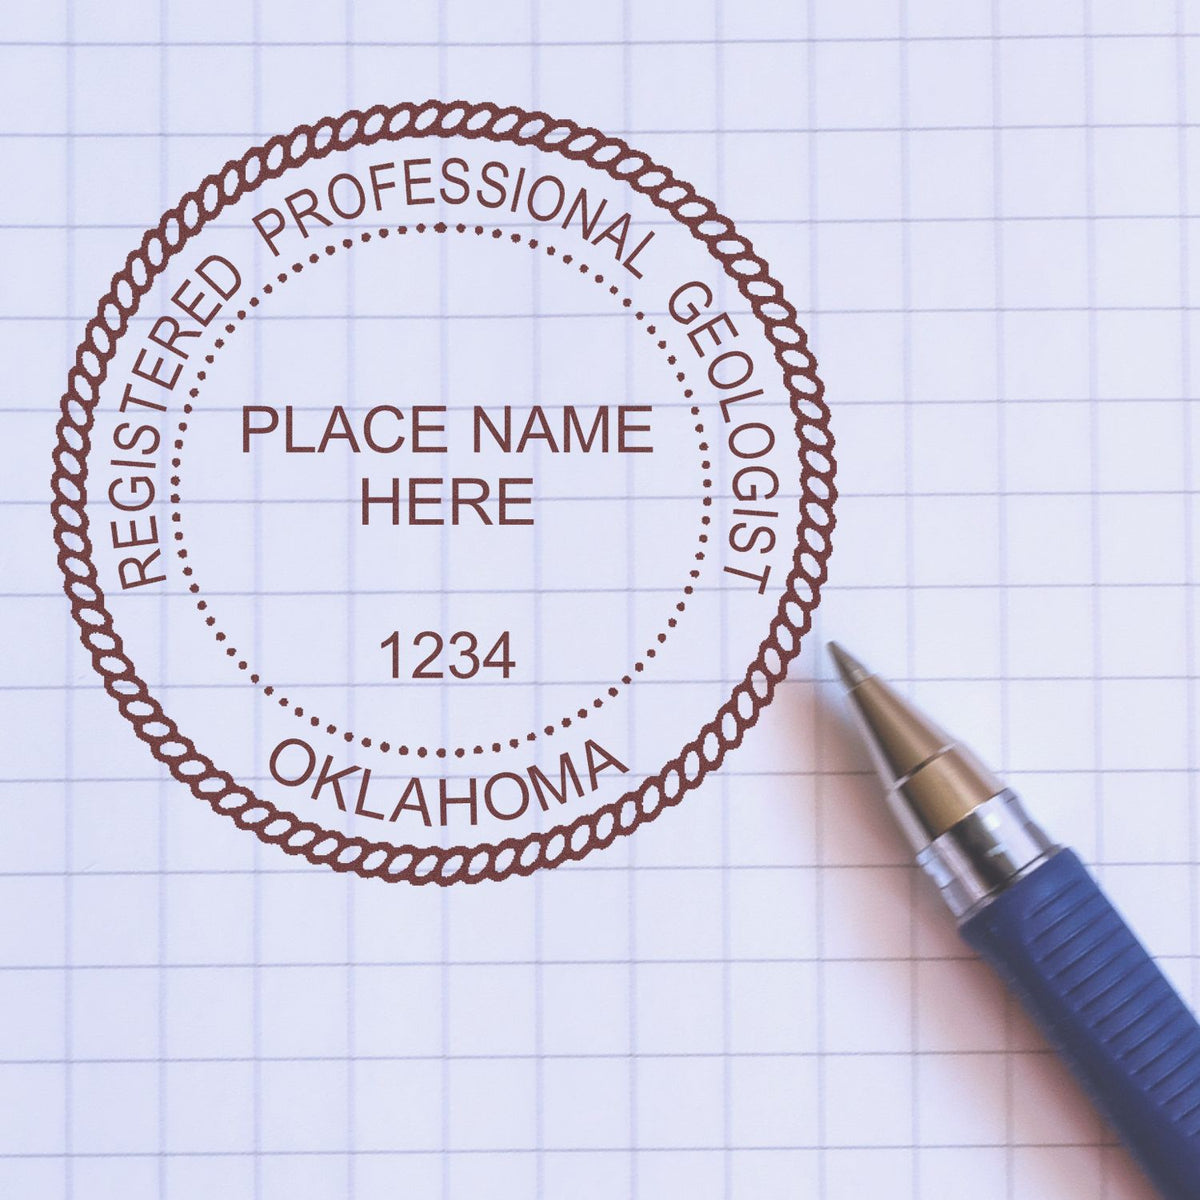 The Self-Inking Oklahoma Geologist Stamp stamp impression comes to life with a crisp, detailed image stamped on paper - showcasing true professional quality.